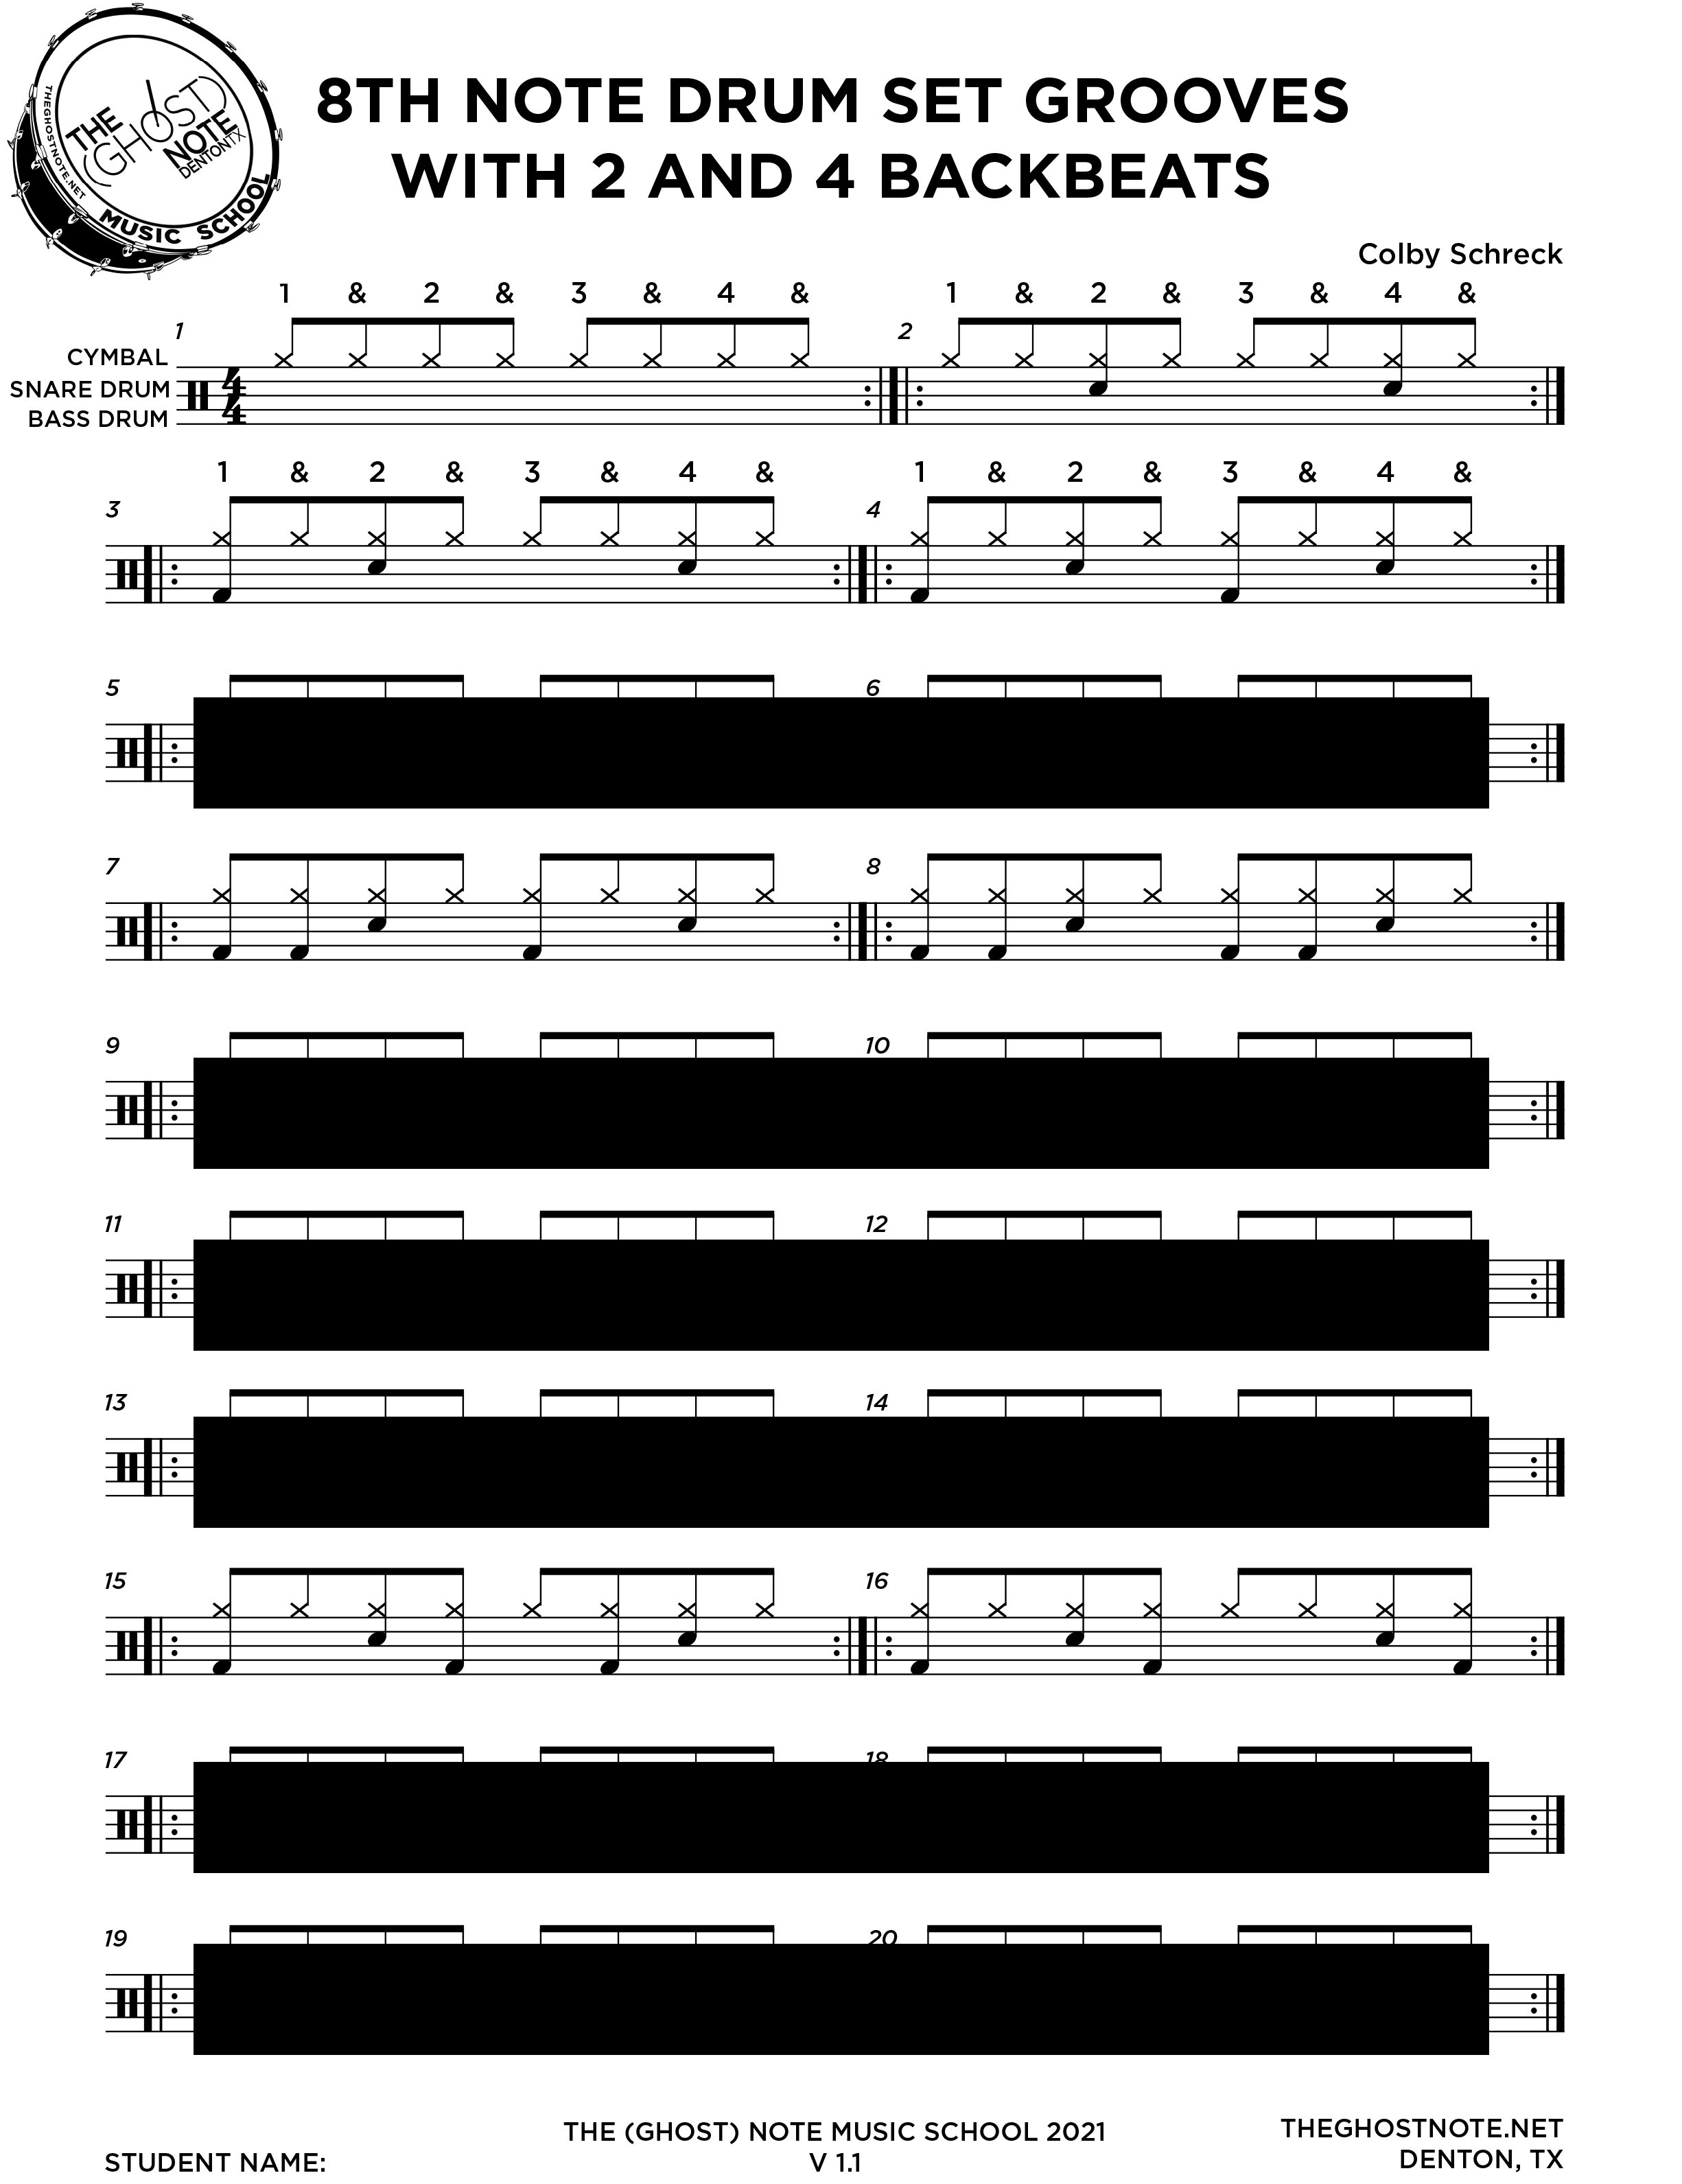 8TH NOTE DRUM SET GROOVES WITH 2 AND 4 BACKBEAT (V 1.1)-1.jpg